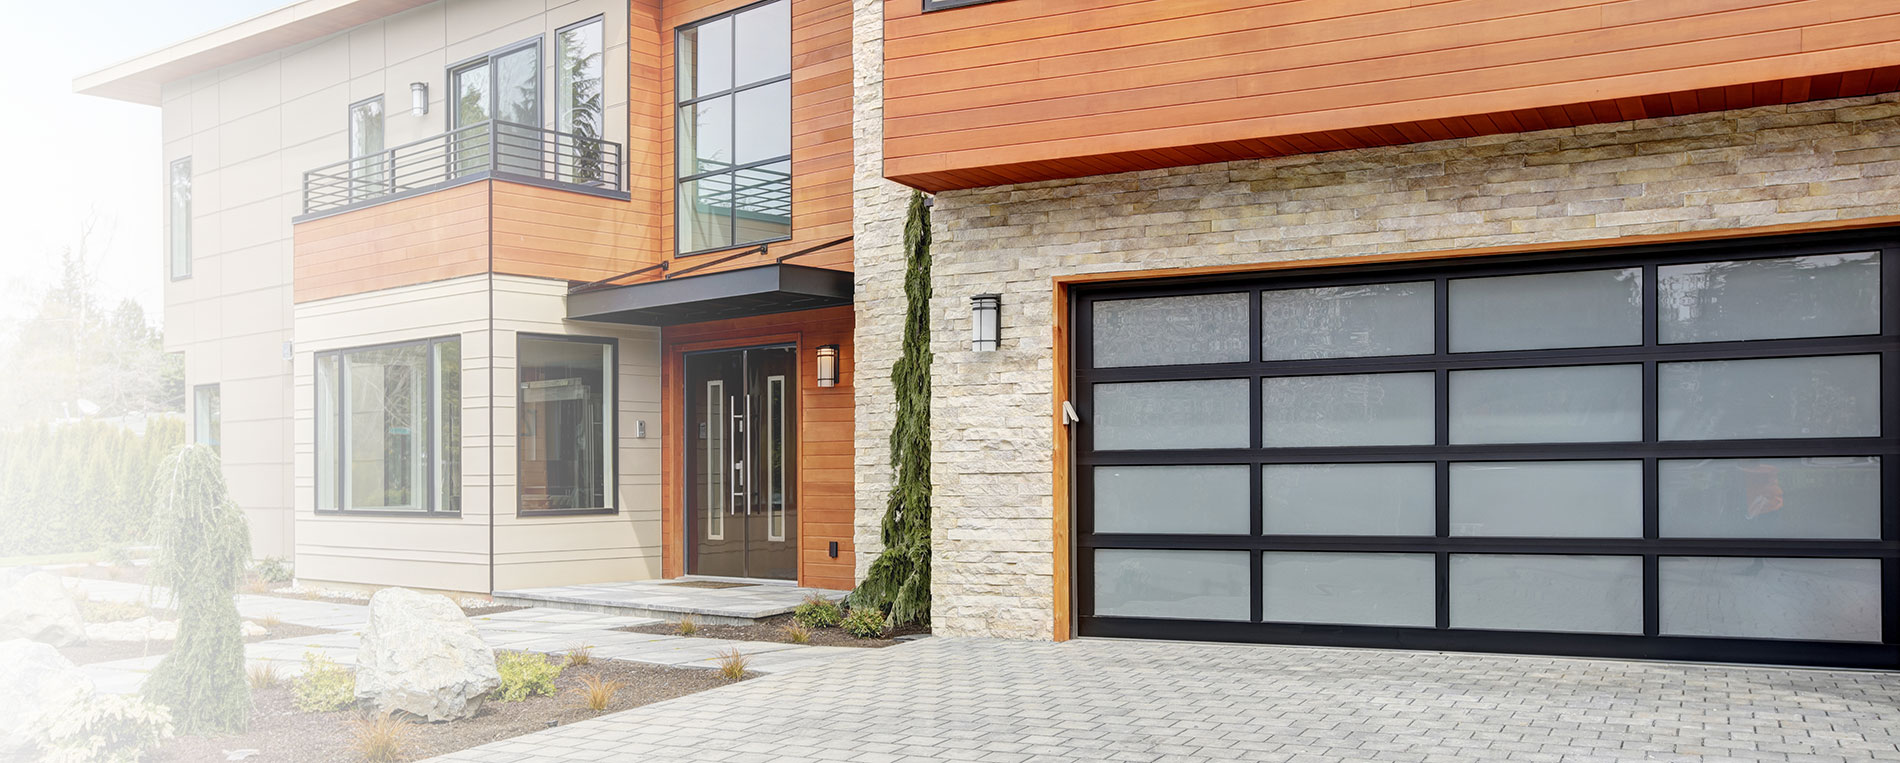 What Are Garage Doors Made Of?